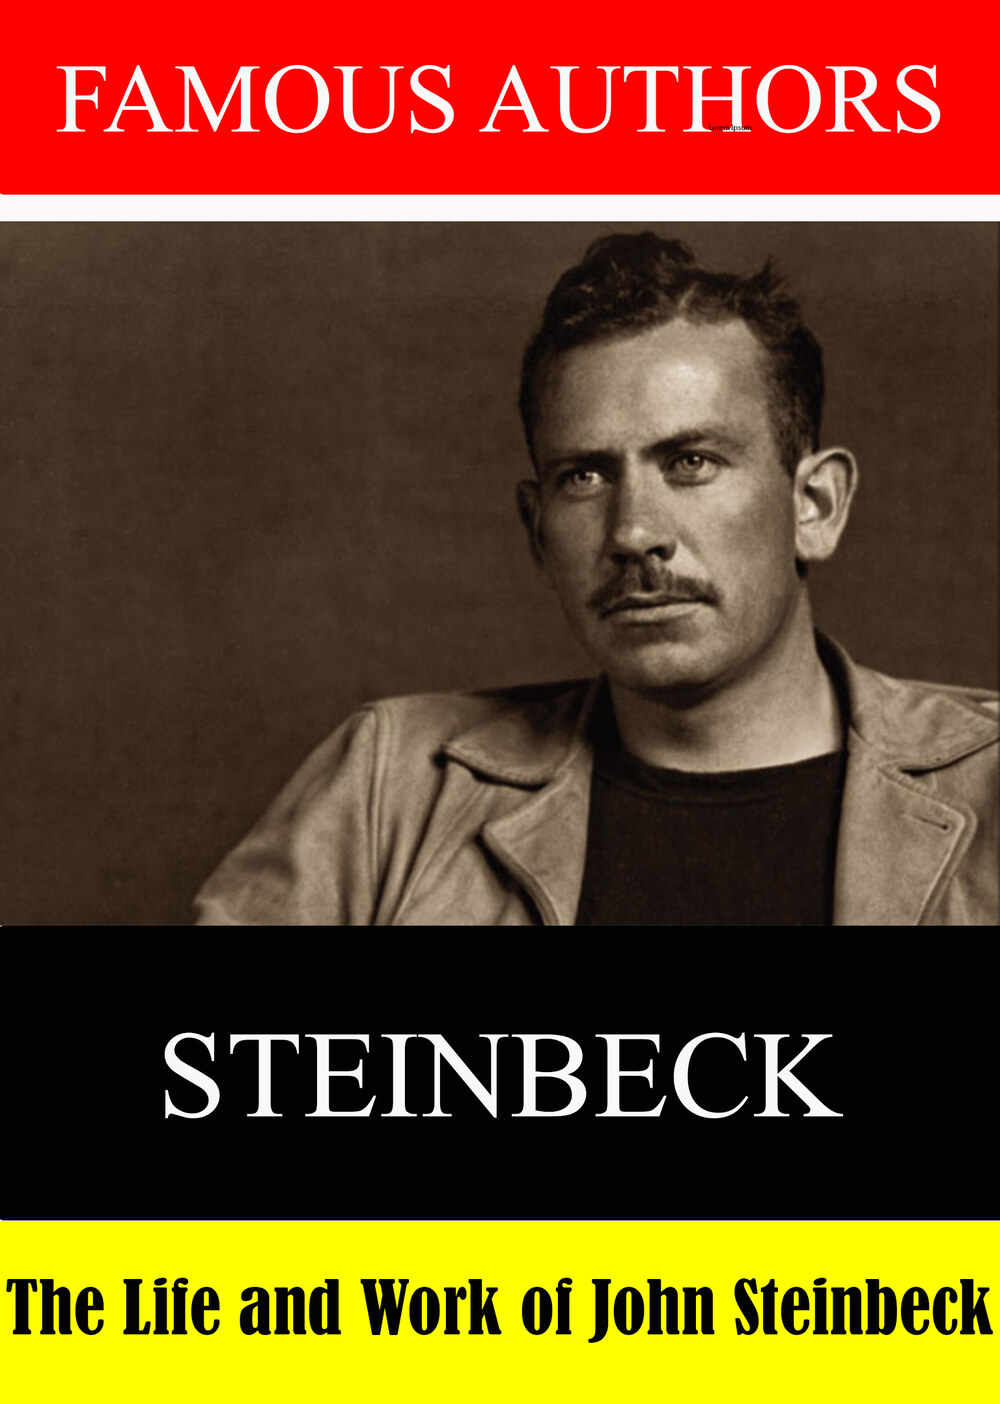 L7906 - Famous Authors: The Life and Work of John Steinbeck